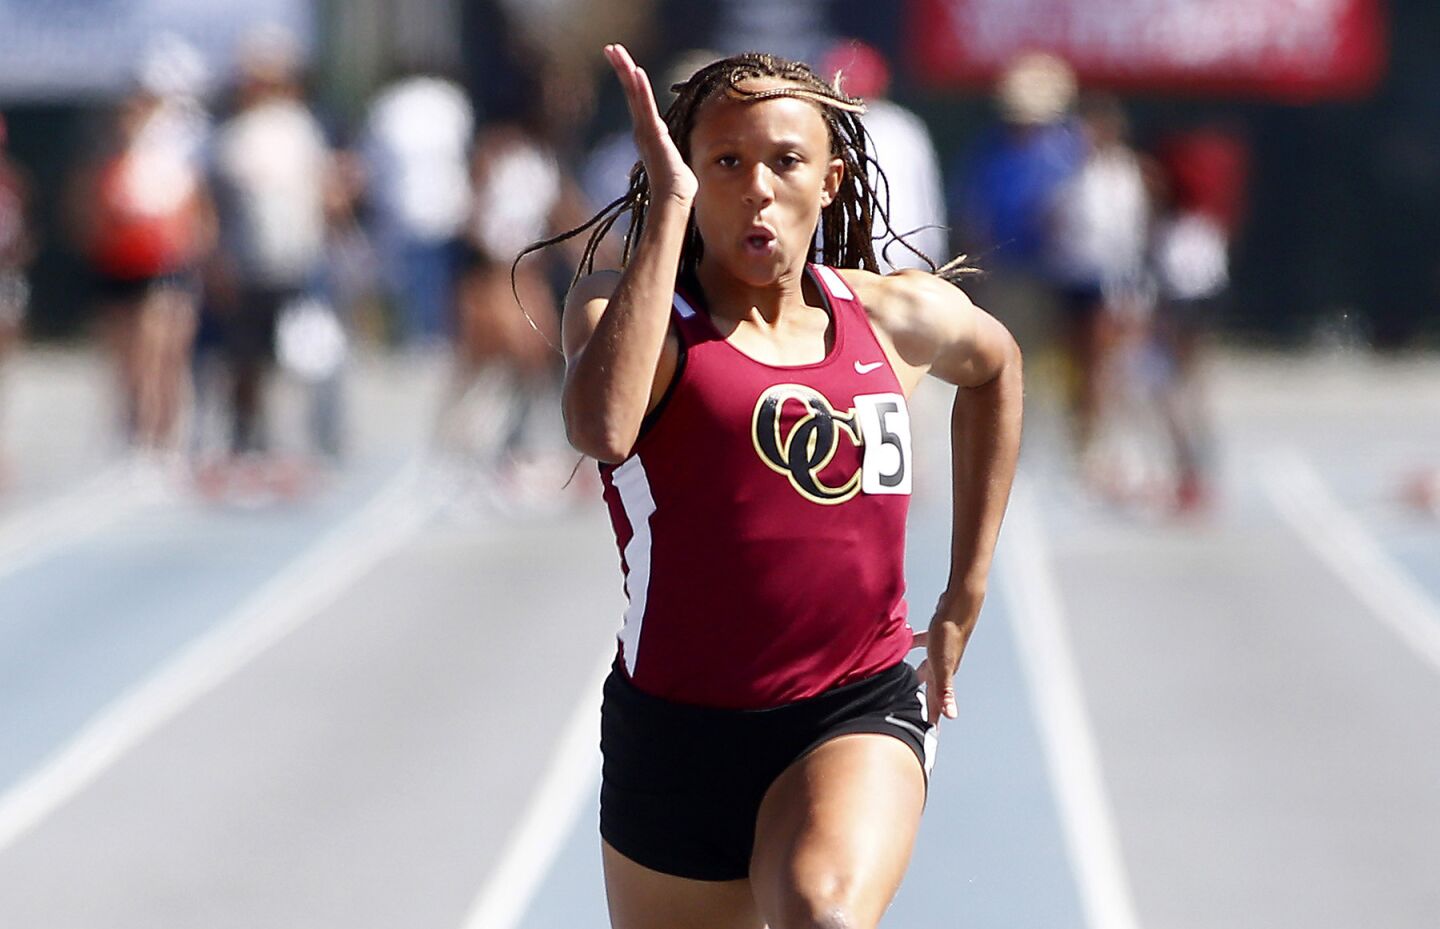 Oaks Christian sprinter Lauren Rain Williams wins the Division 4 girls' 100-meter dash during the CIF Southern Section finals at Cerritos College.